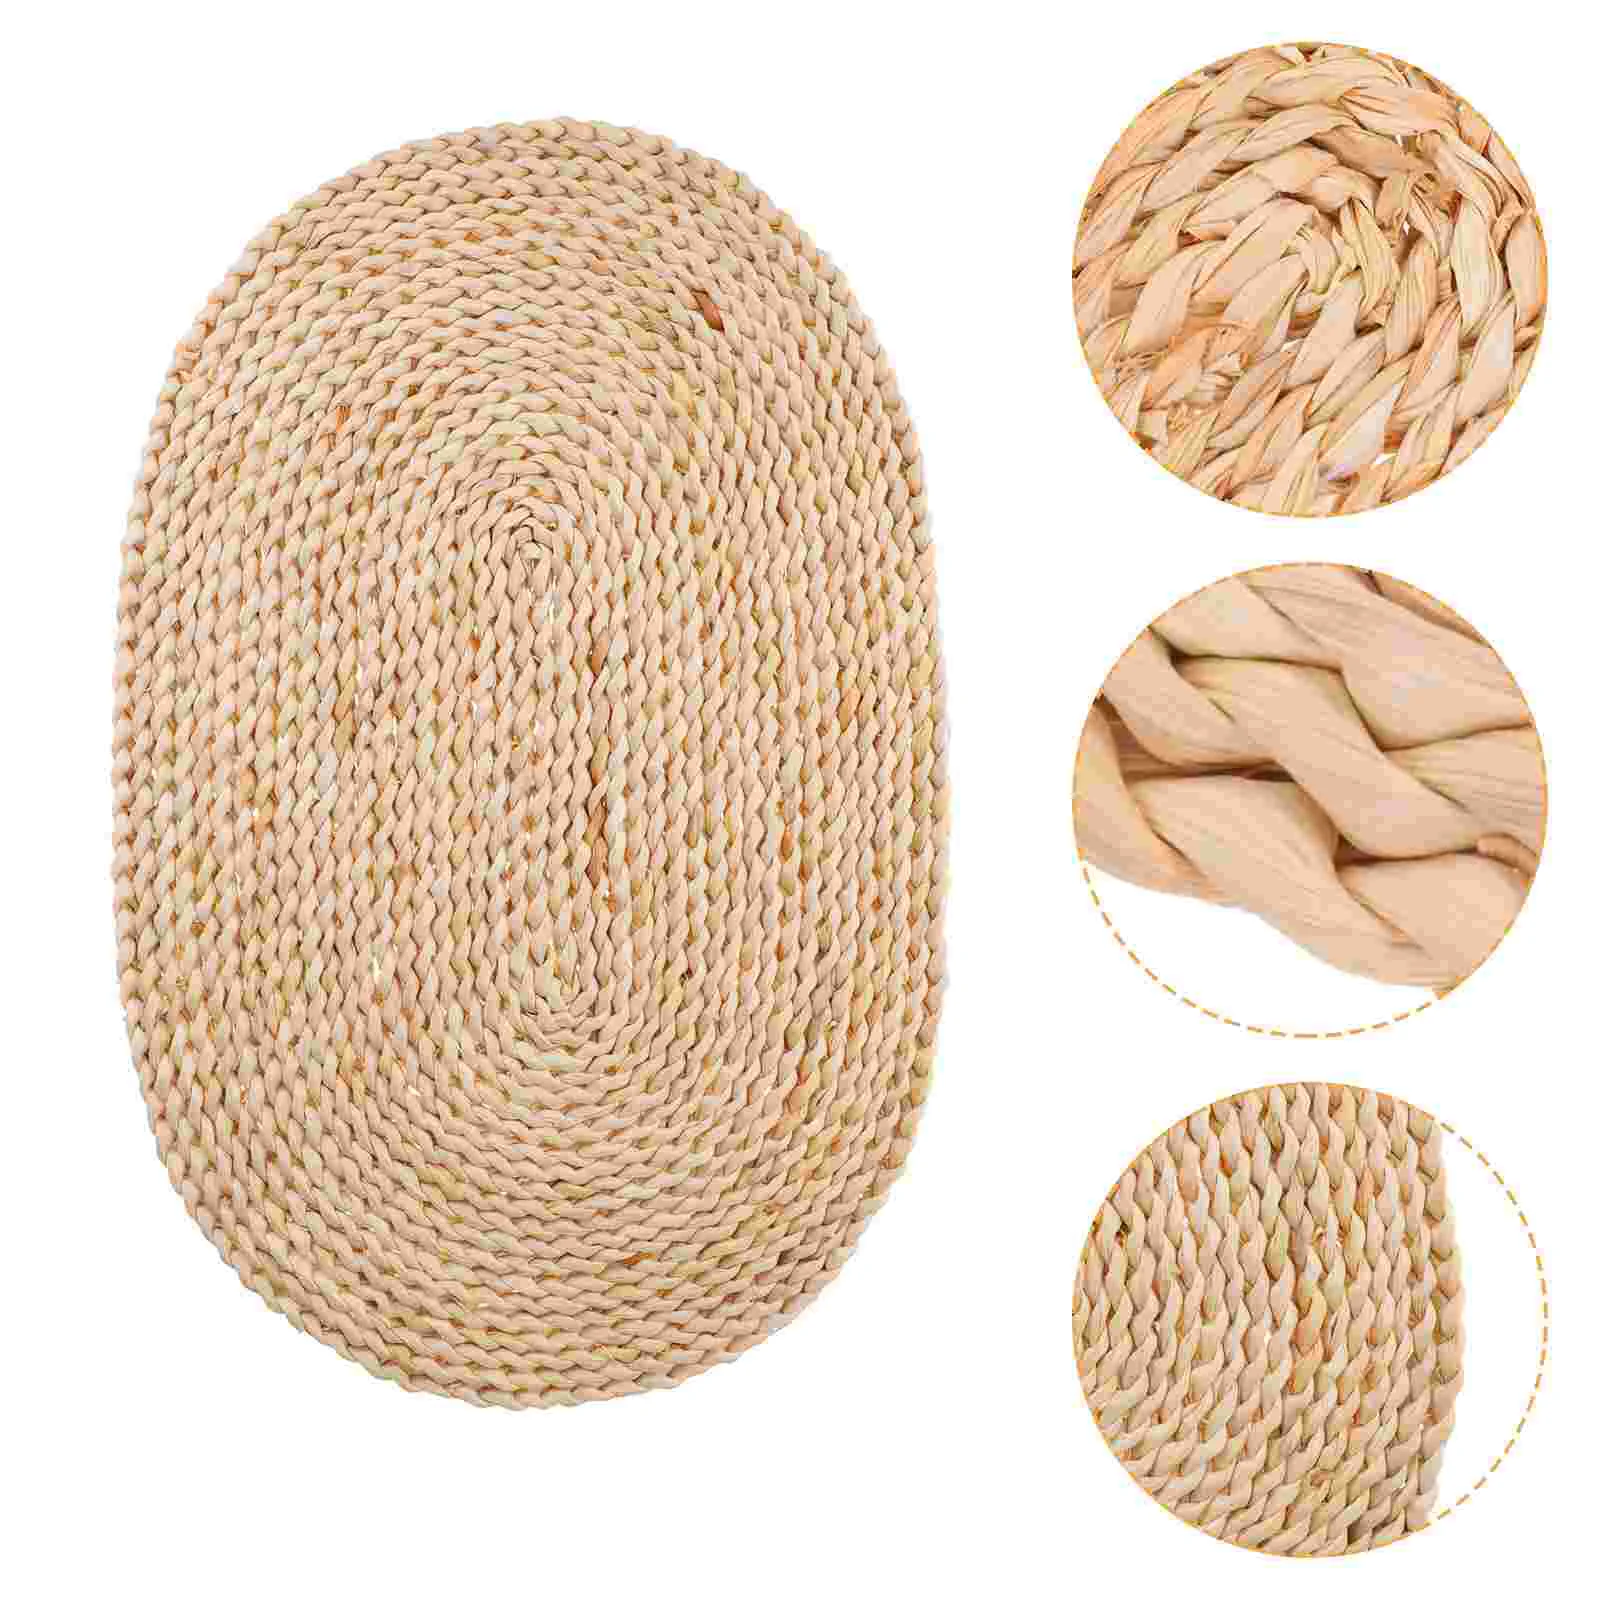 

Placemats Table Placemat Mat Woven Pot Rattan Coasters Tableware Straw Kitchen Braided Mats Wicker Rustic Dining Decorative